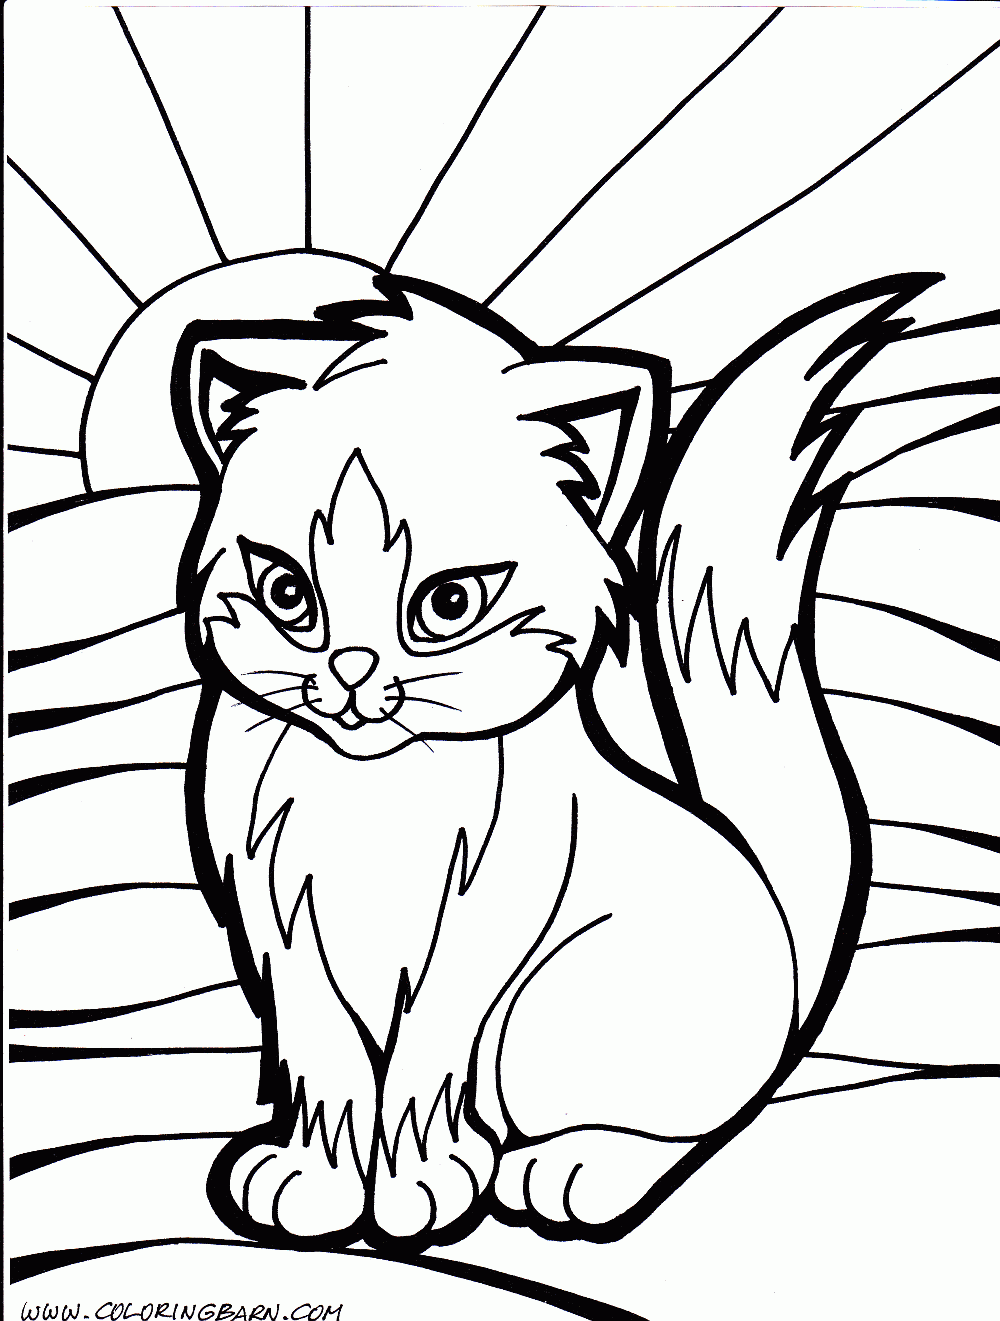 Printable Coloring Pages Of Kittens - Printable Blank World